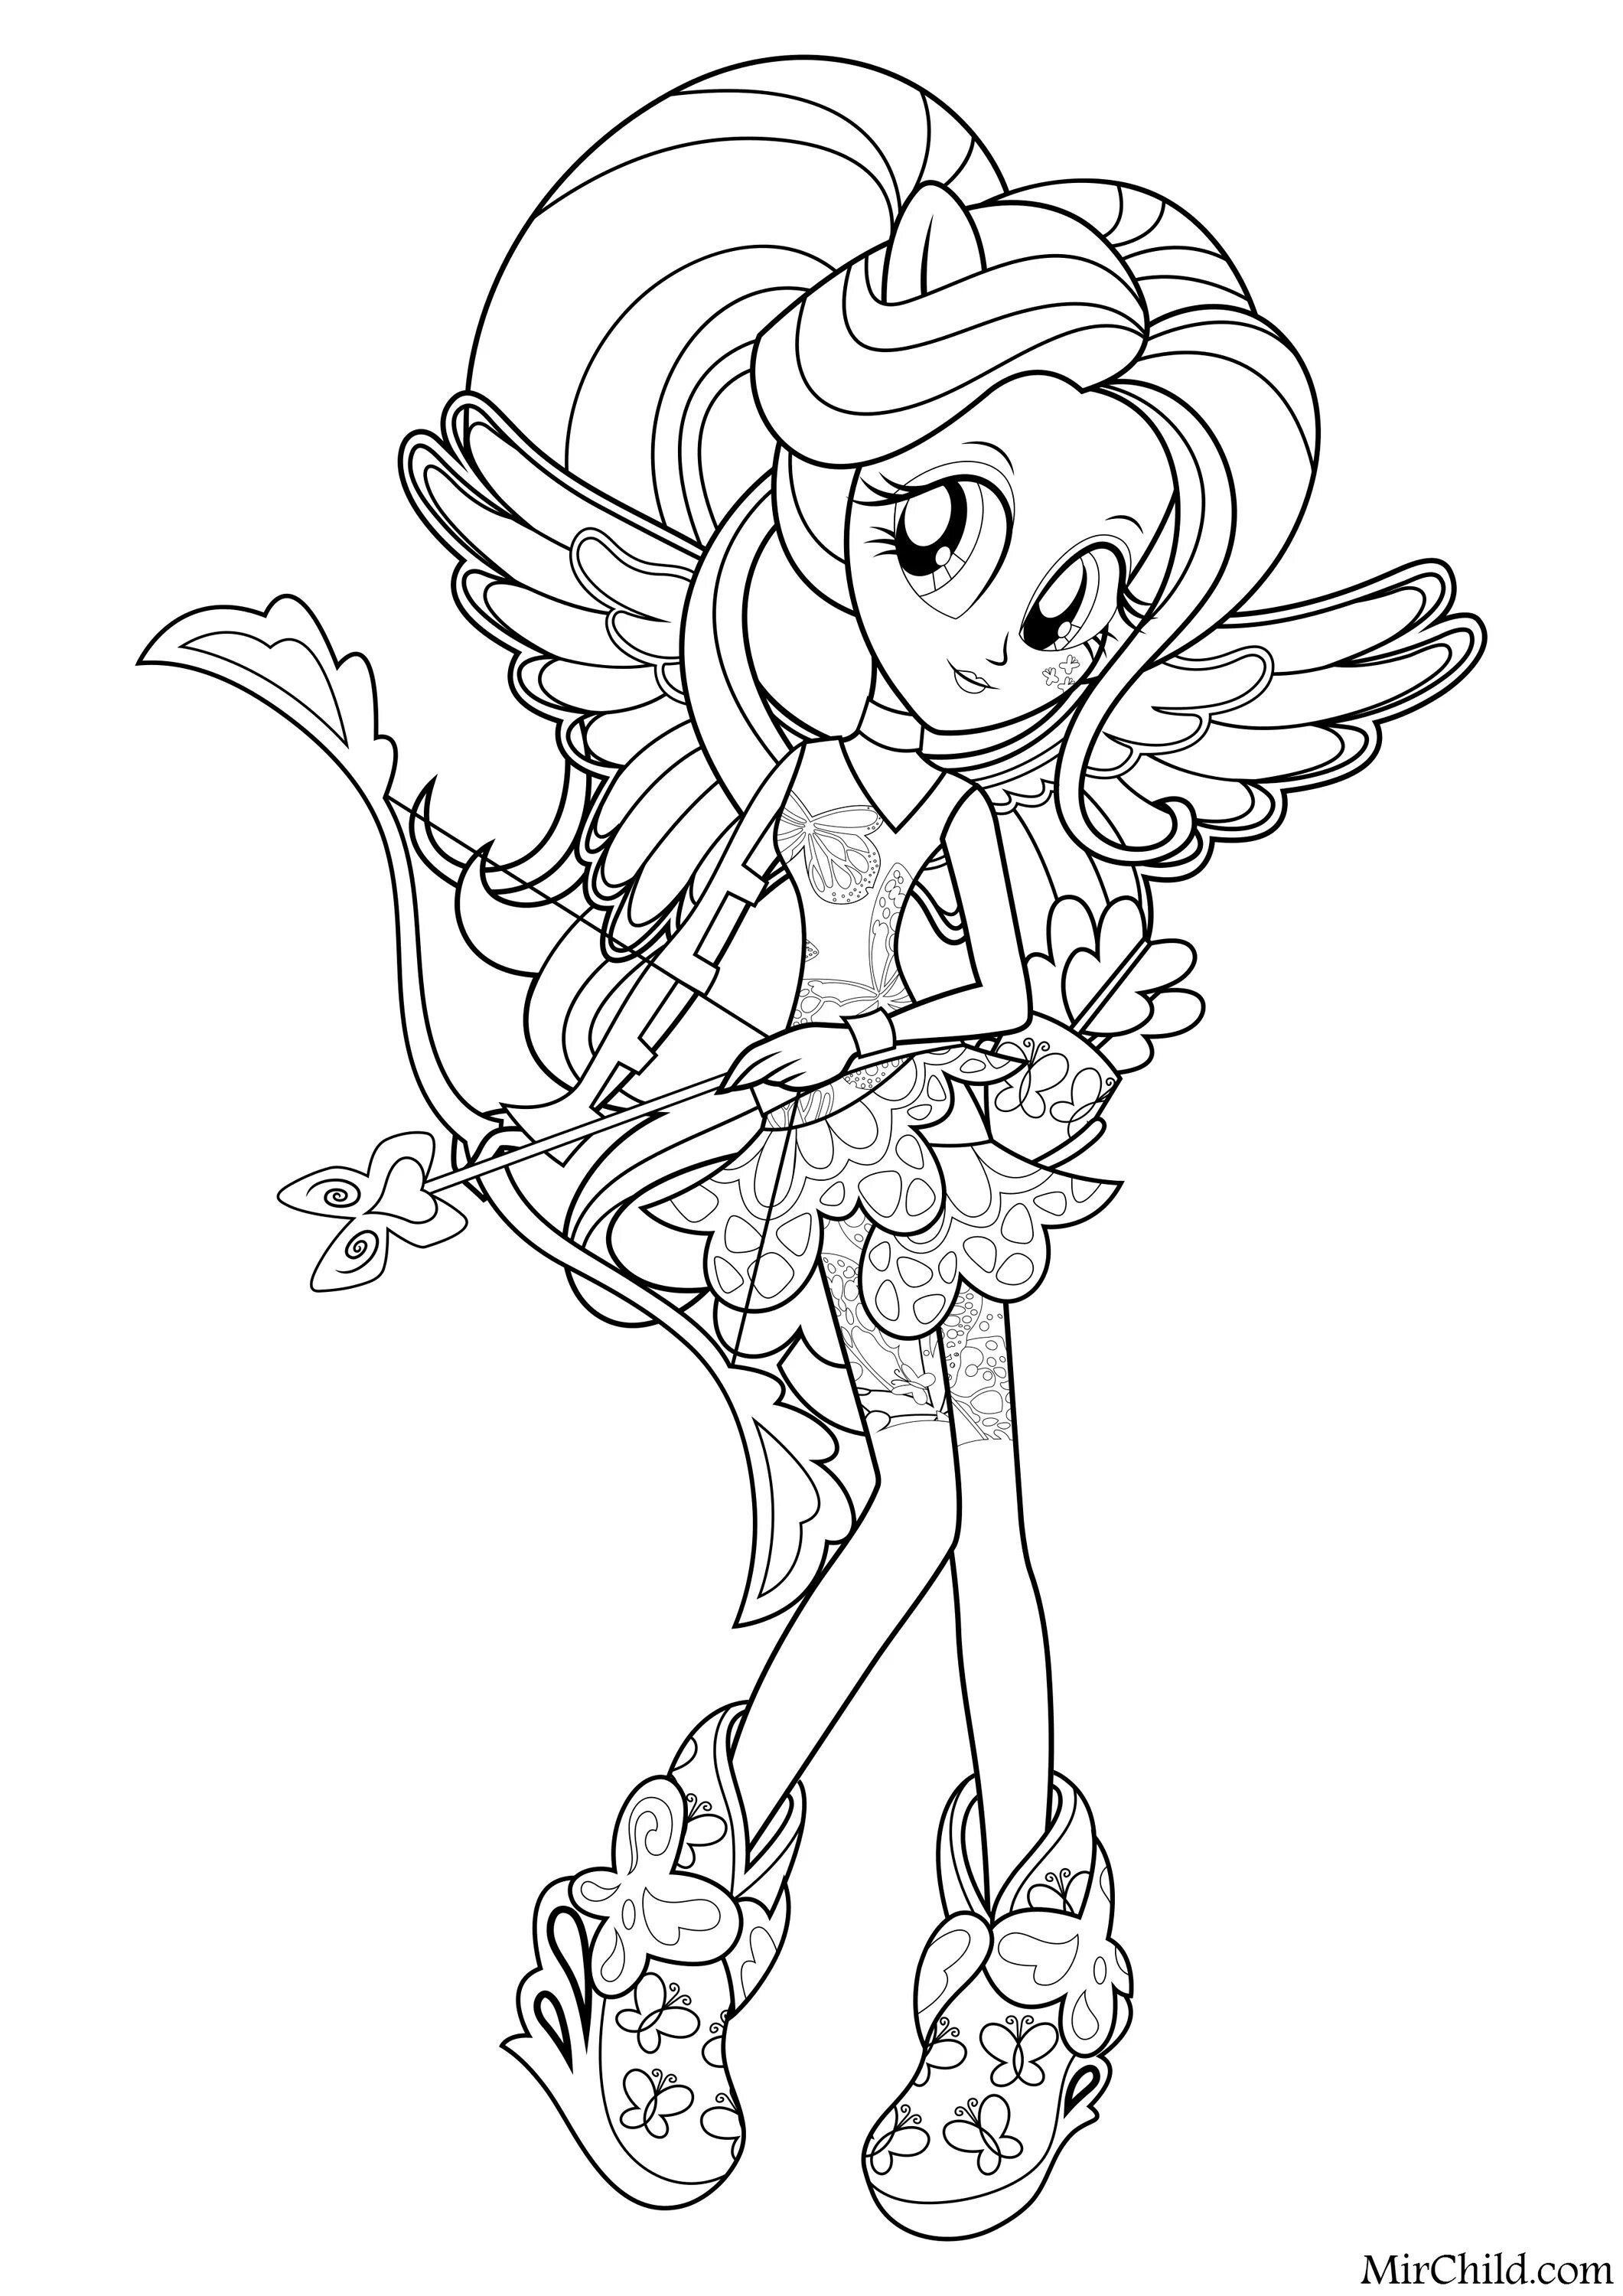 My little pony girls amazing coloring pages